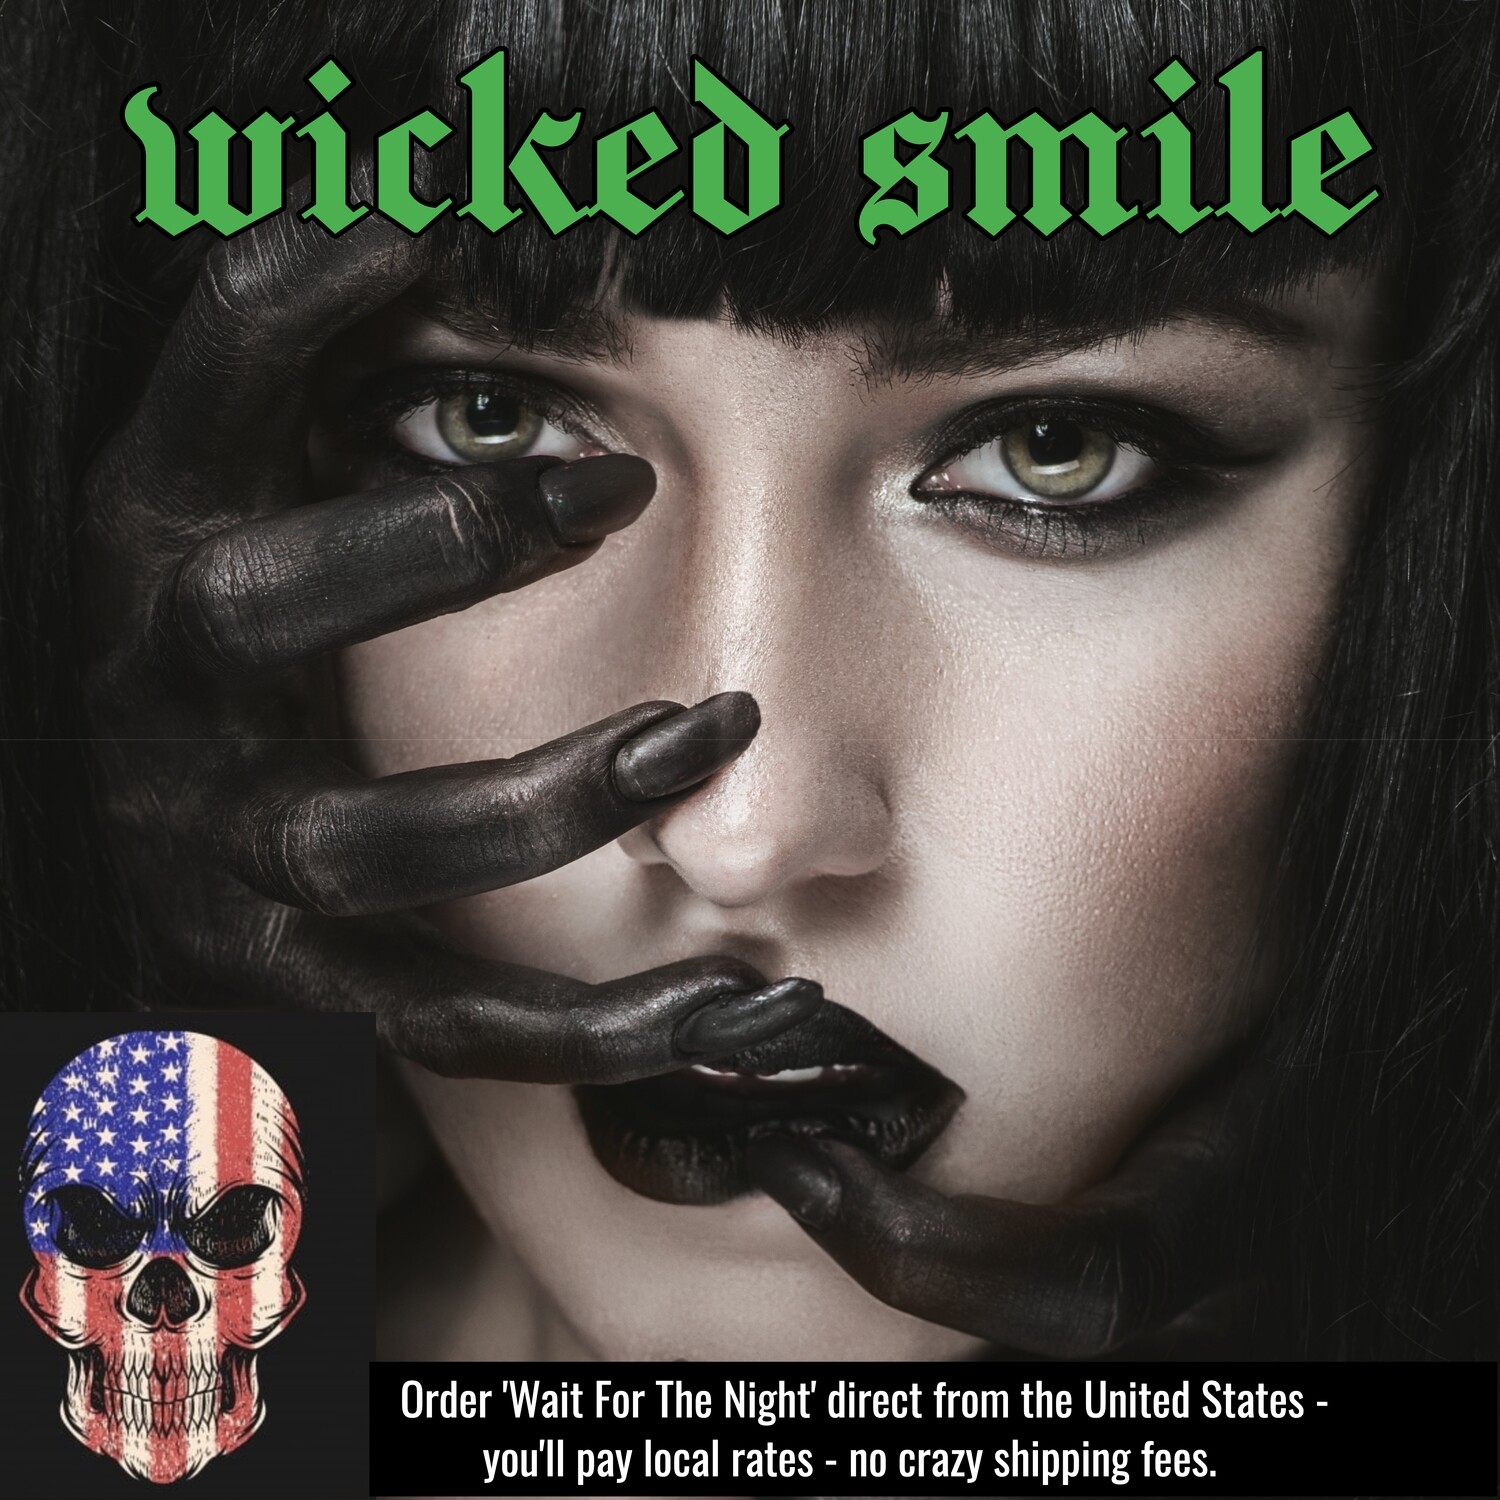 Wicked Smile - Wait For The Night cd (UNITED STATES ORDERS ONLY)